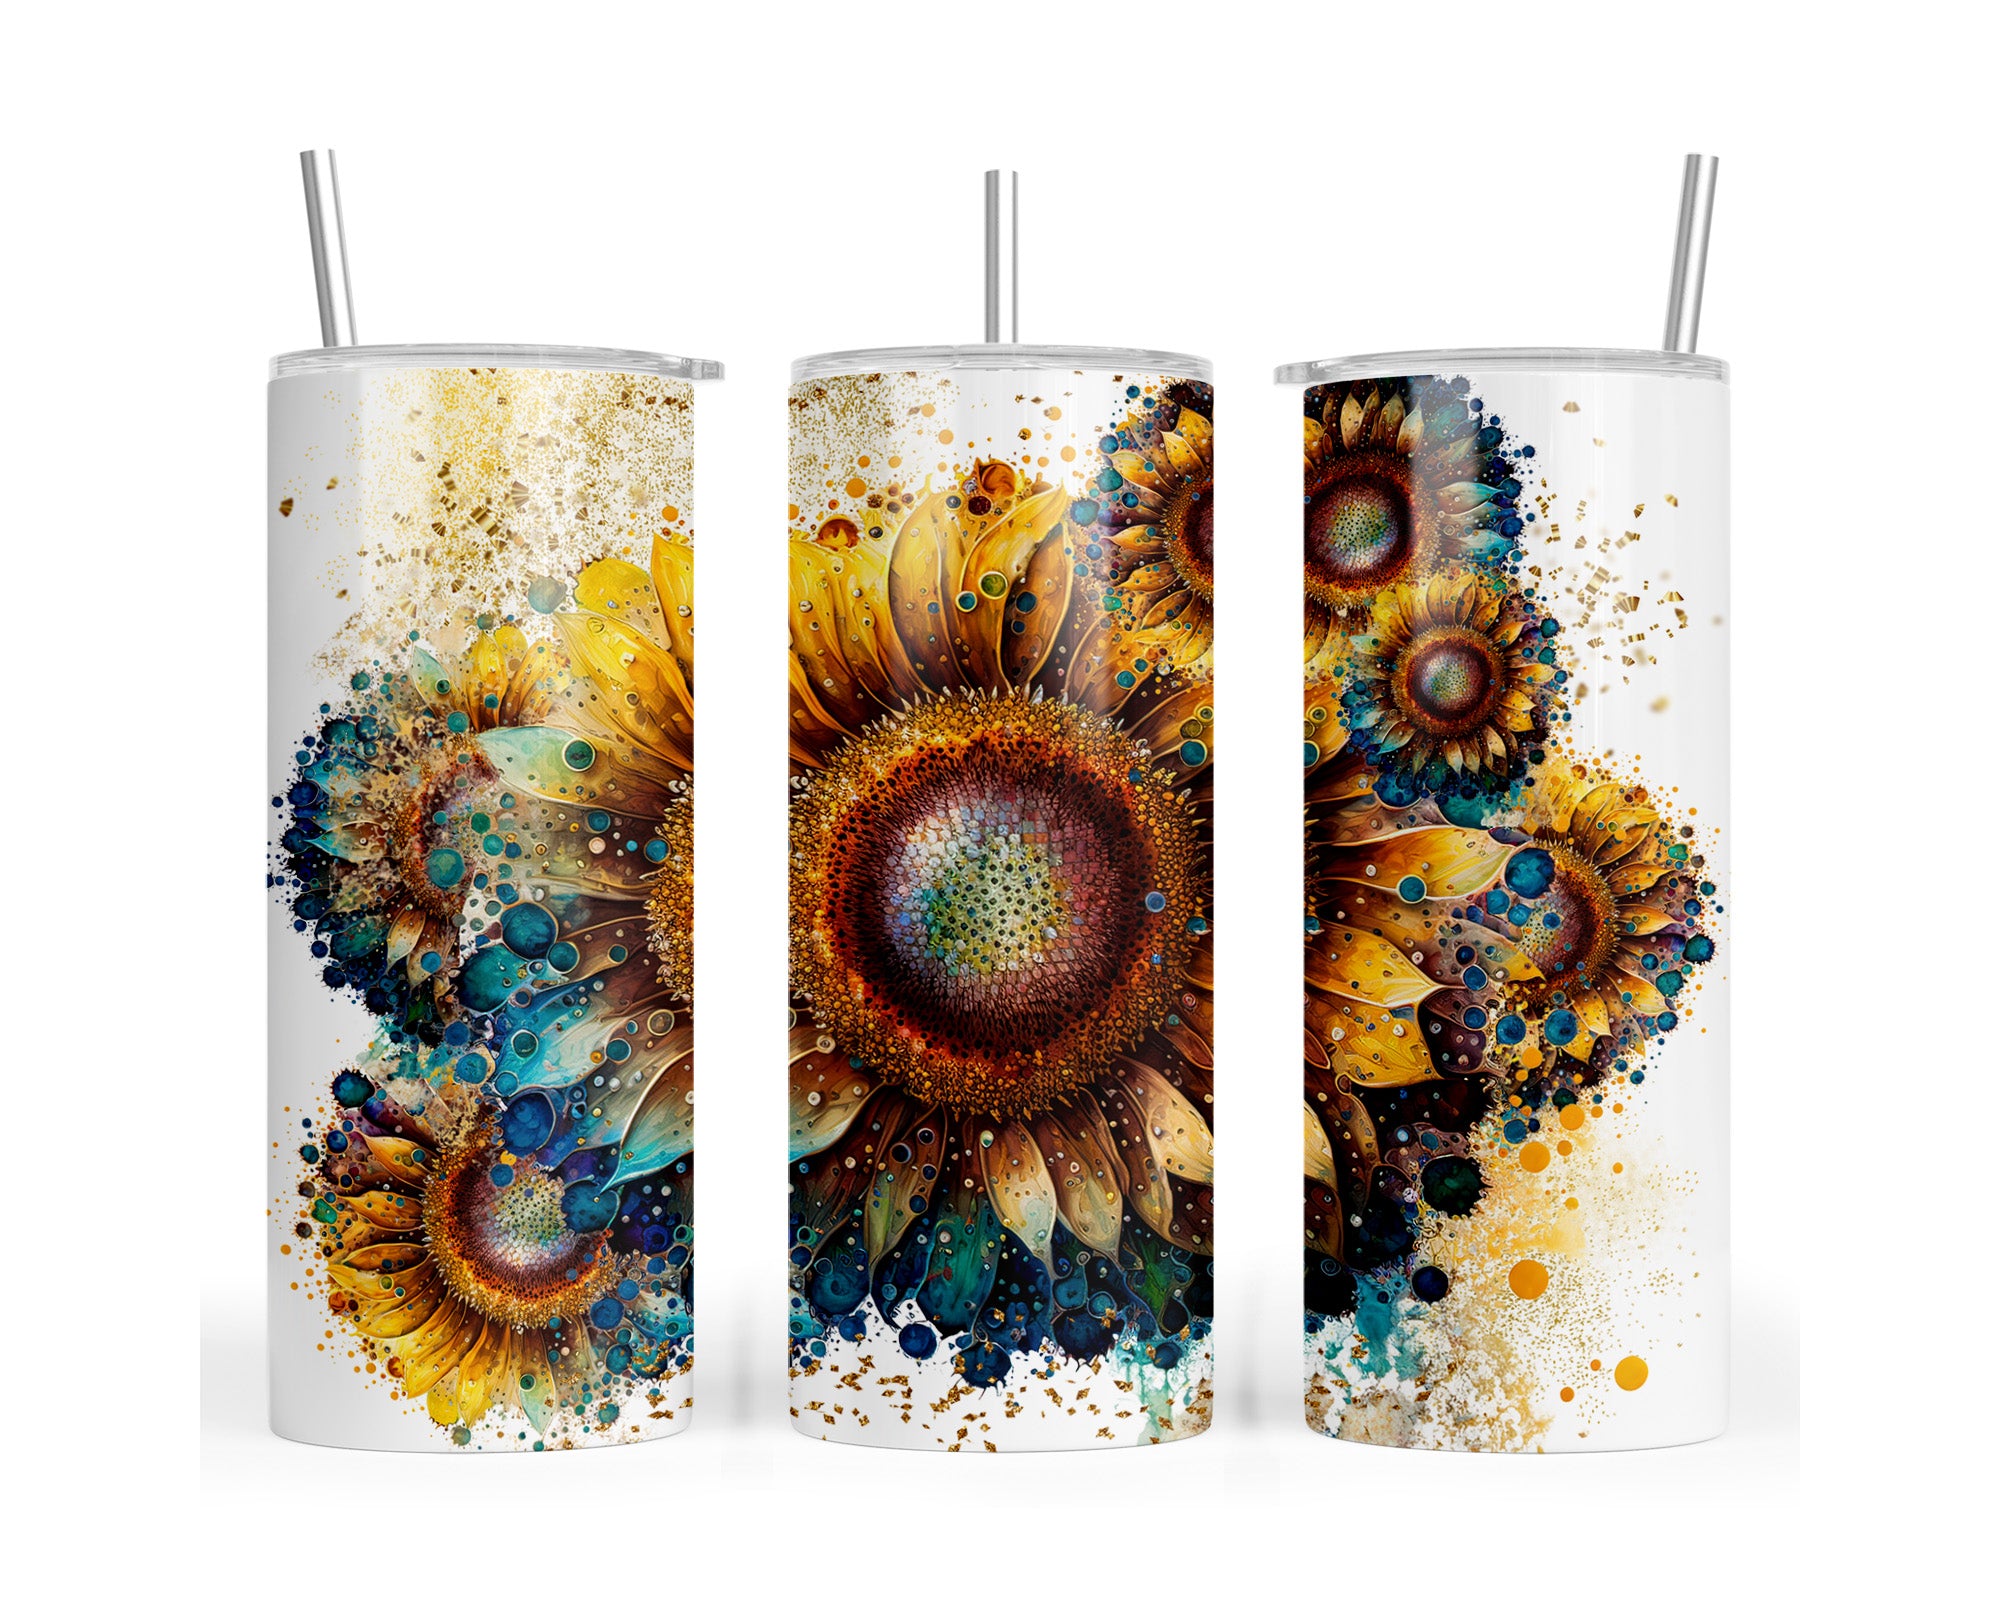 Sublimation Prints - 20oz Straight Skinny Tumblers (10 Pack) - Sarcasm –  The Stainless Depot